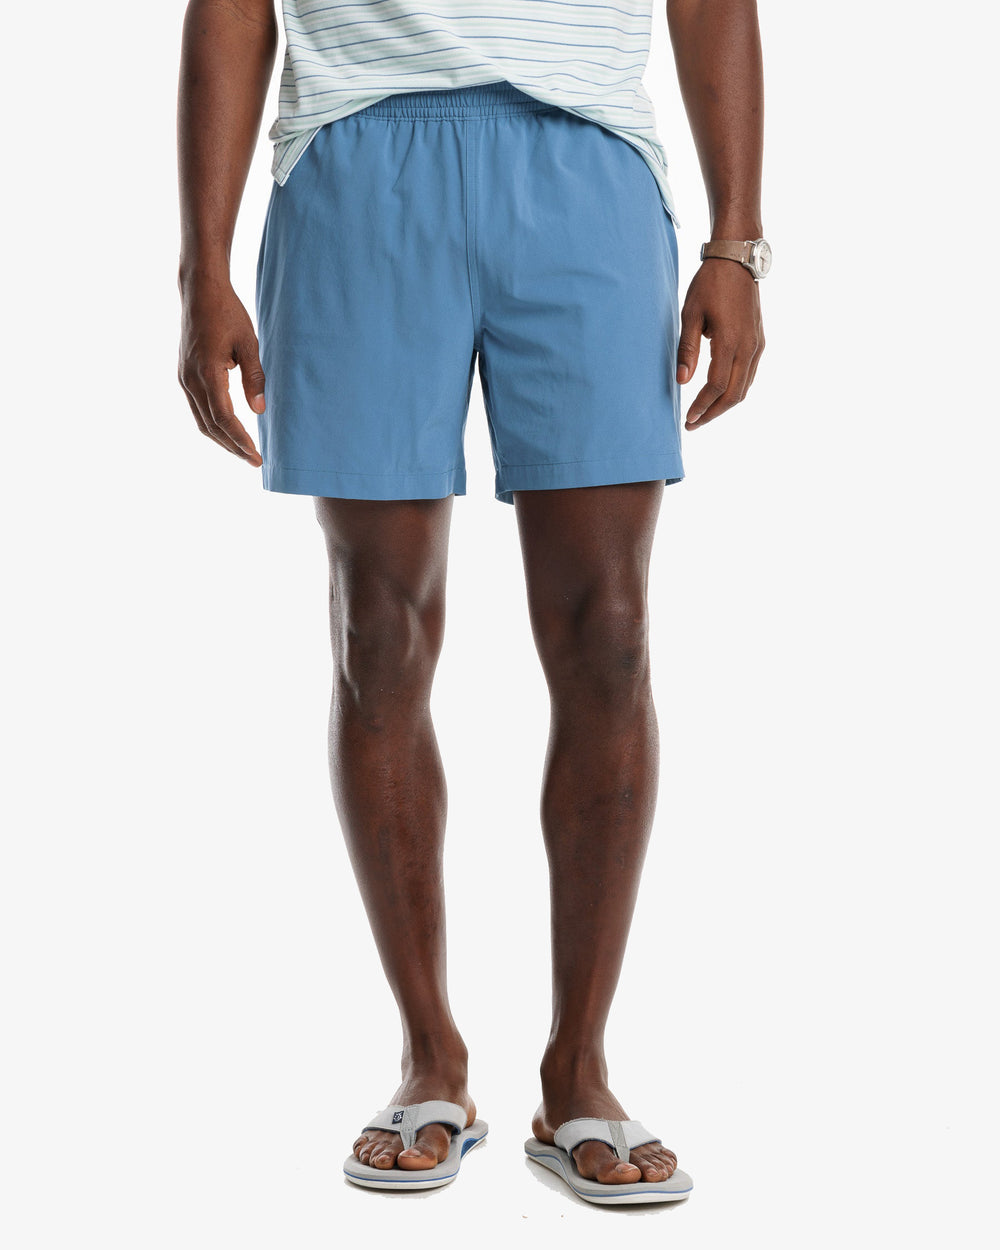 The model front view of the Men's Rip Channel 6 Inch Performance Short by Southern Tide - Blue Ridge